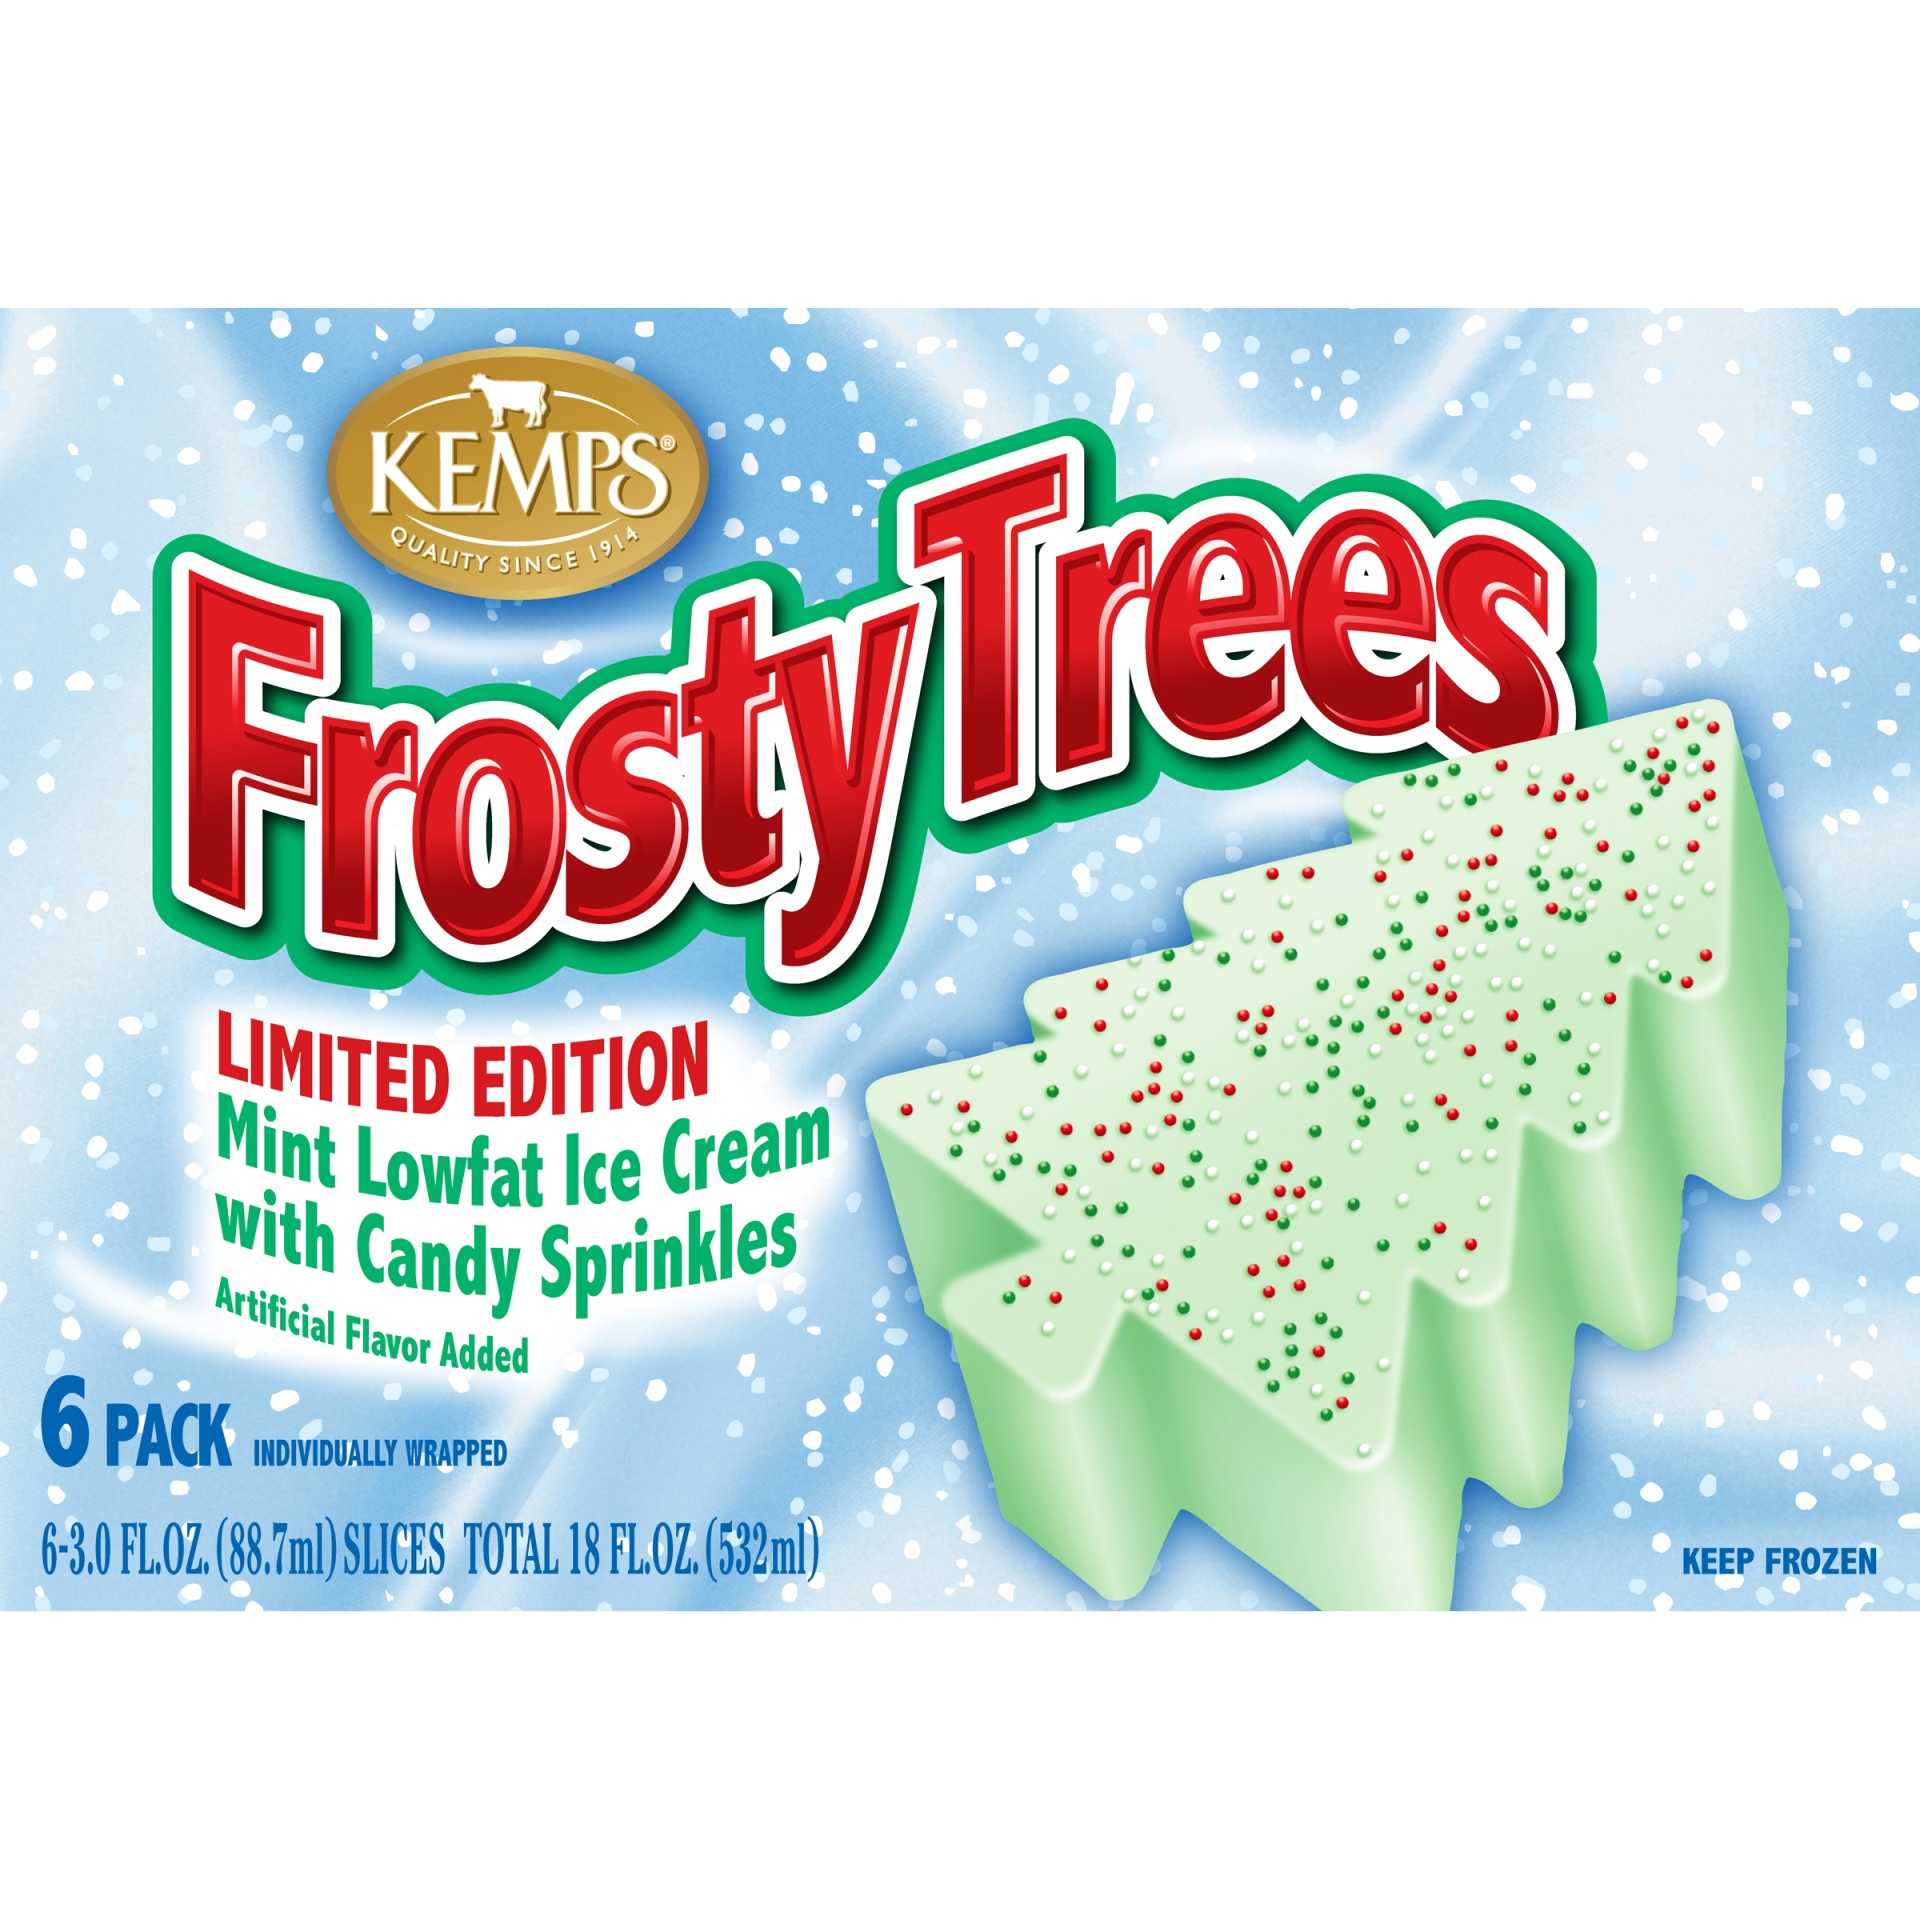 slide 6 of 8, Kemps Frosty Trees Mint Lowfat Ice Cream With Candy Sprinkles Slices, 6 ct; 3 fl oz